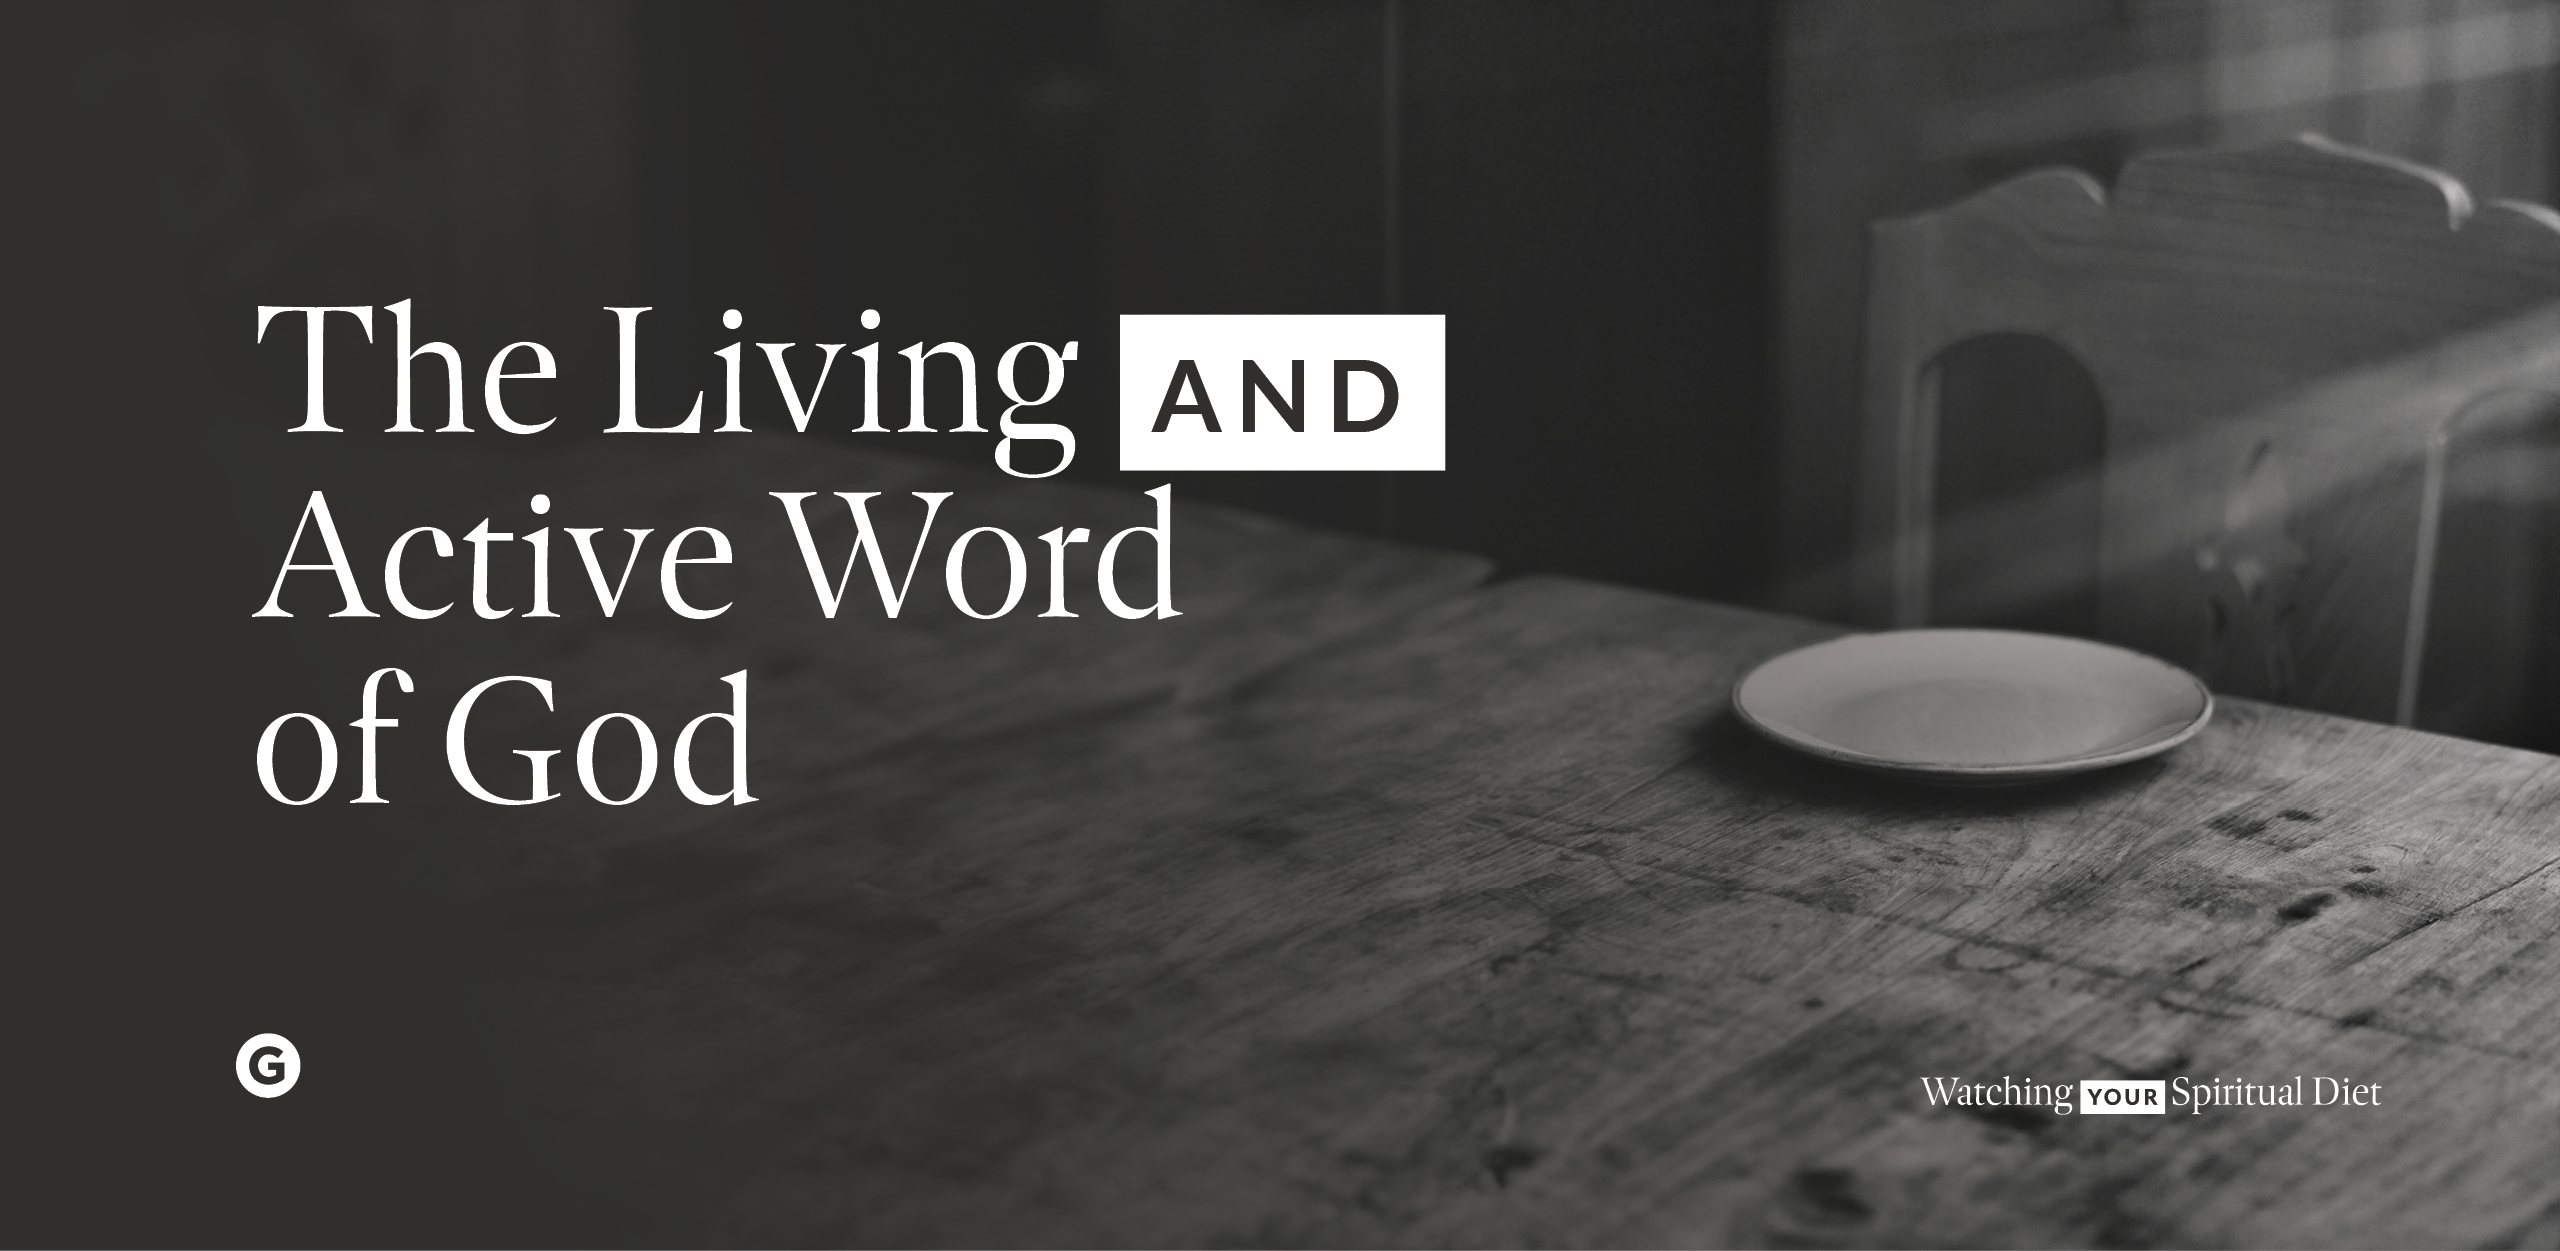 The Living and Active Word of God